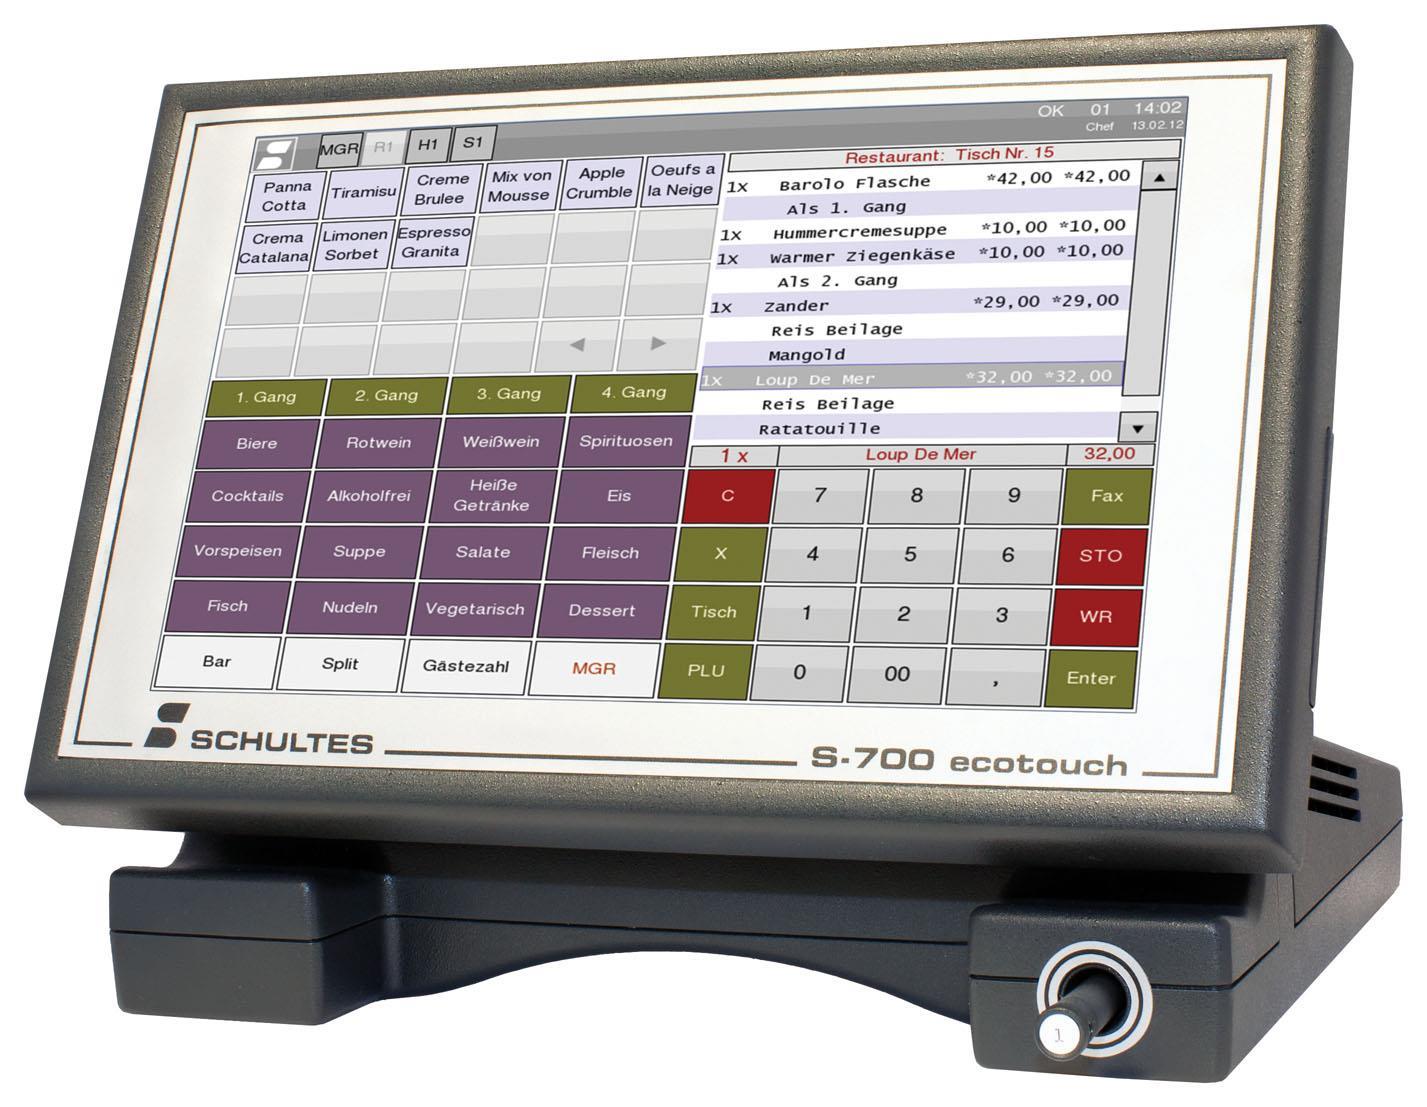 Schultes S-700 ecotouch